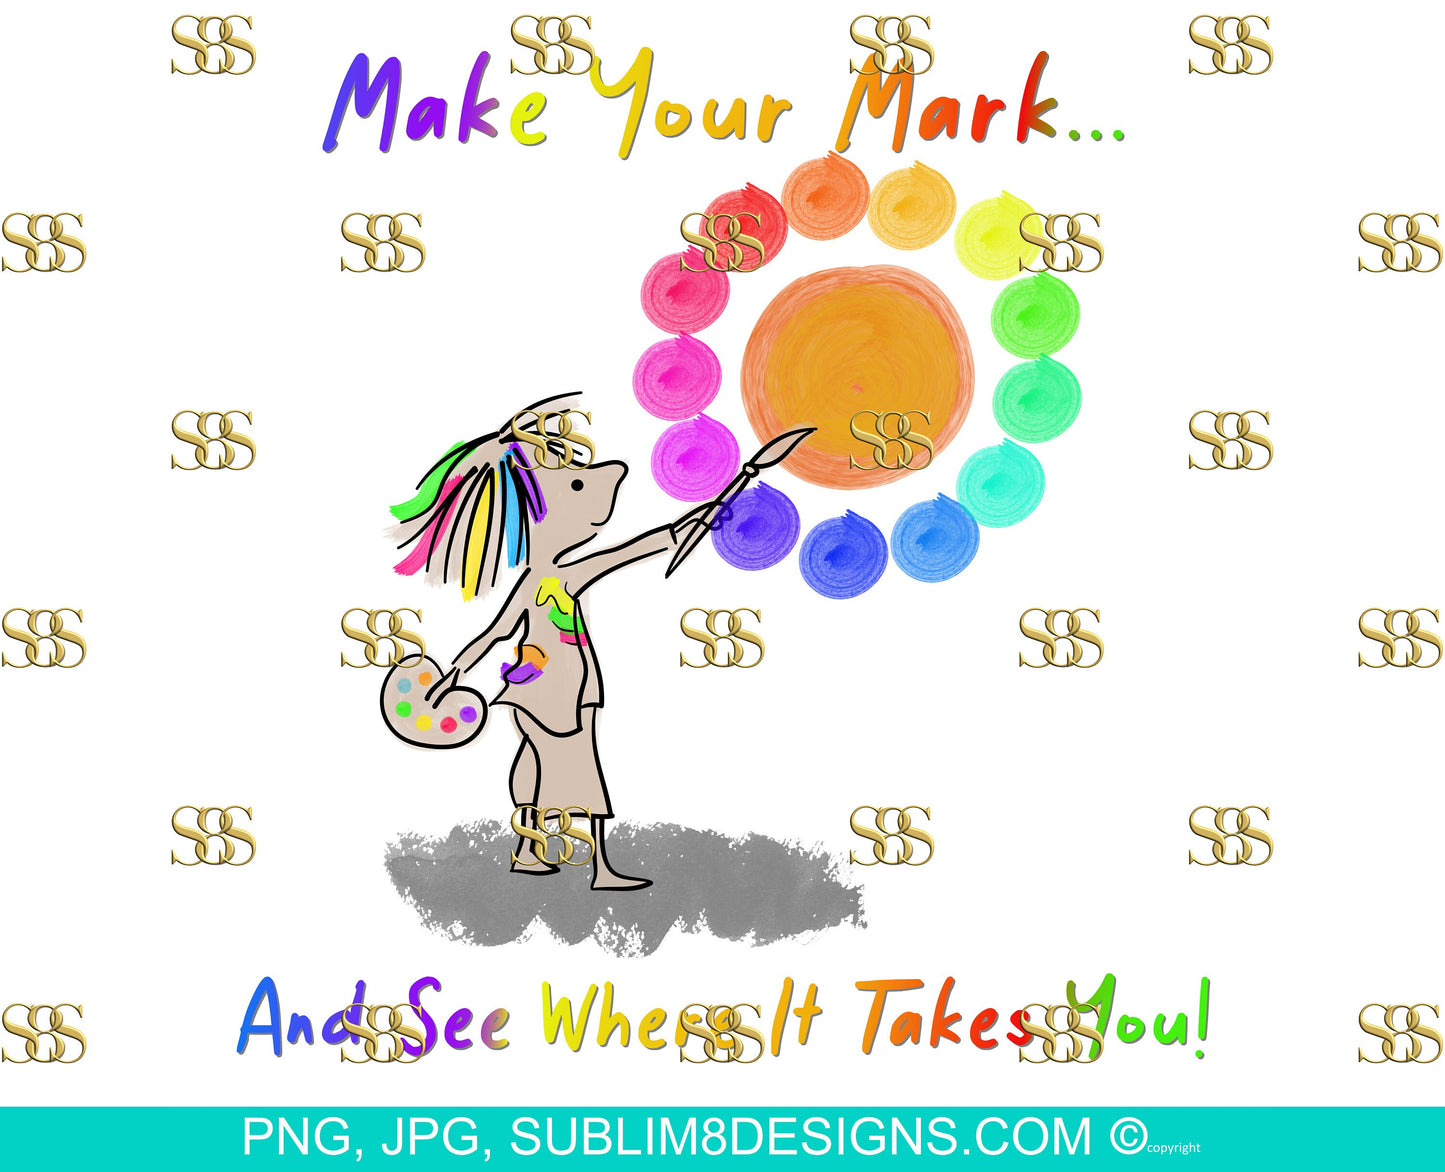 Make Your Mark... And See Where it Takes You! PNG and JPG ONLY